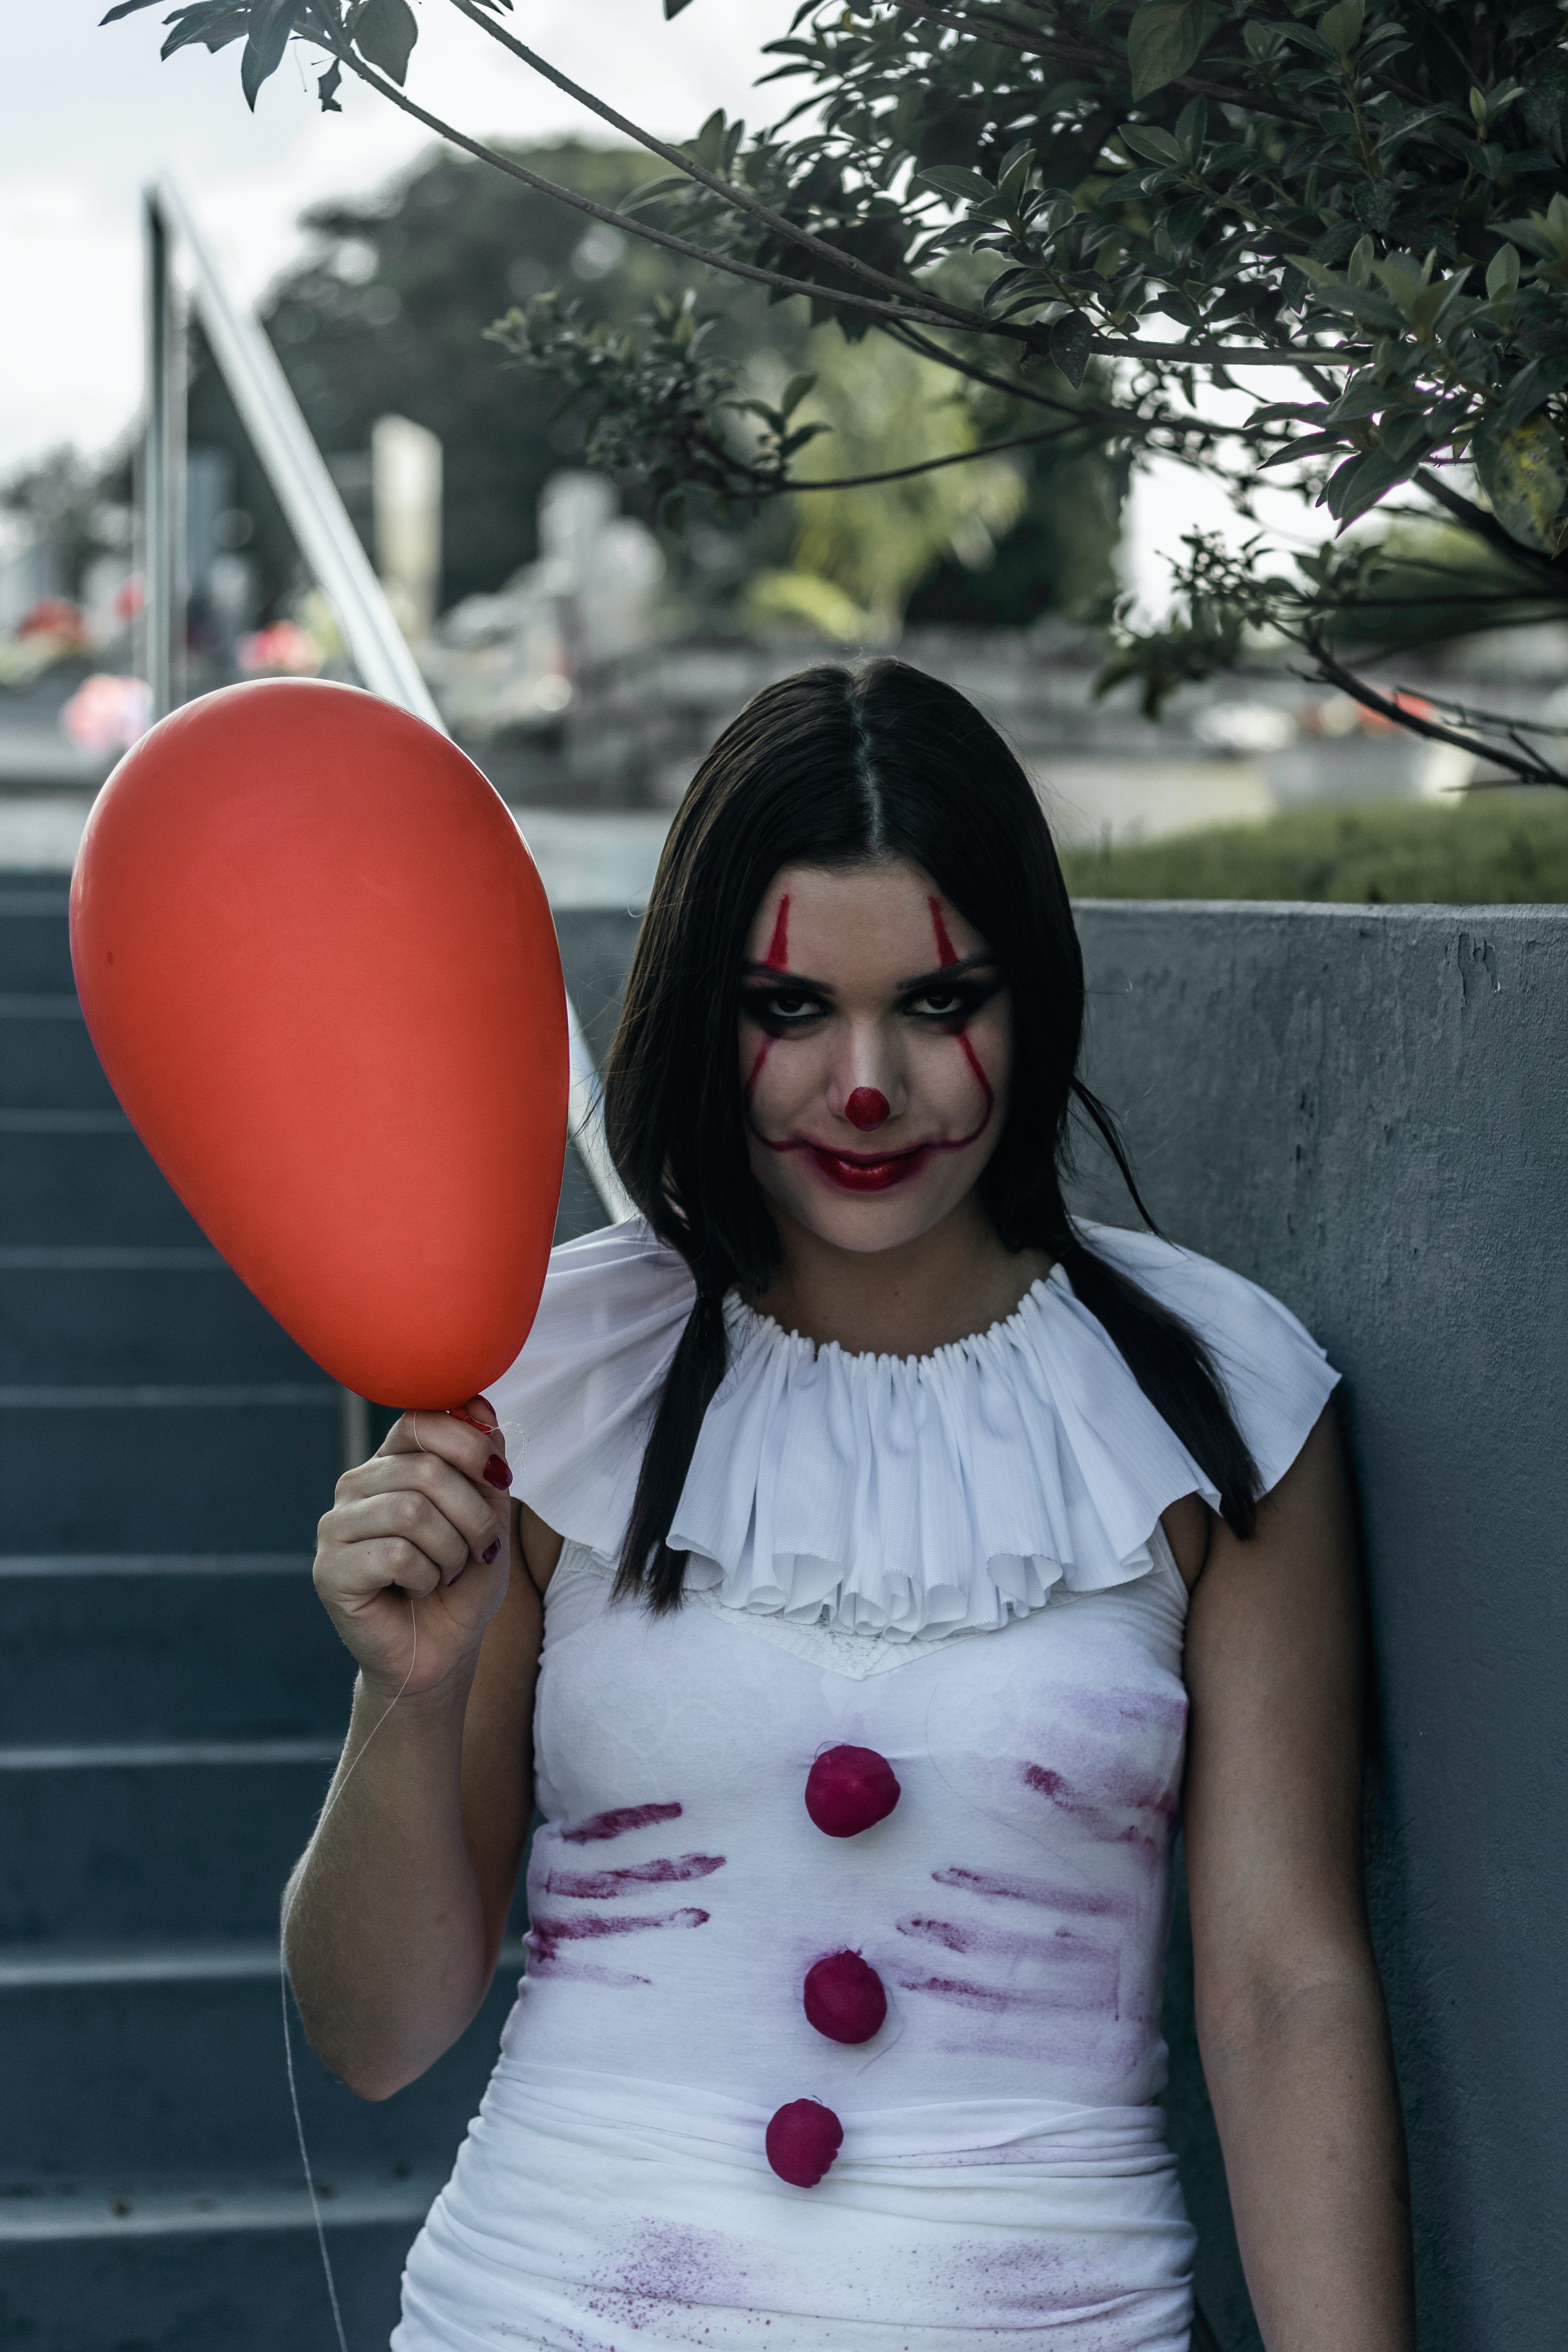 Creepy girl with clown makeup and balloon · Free